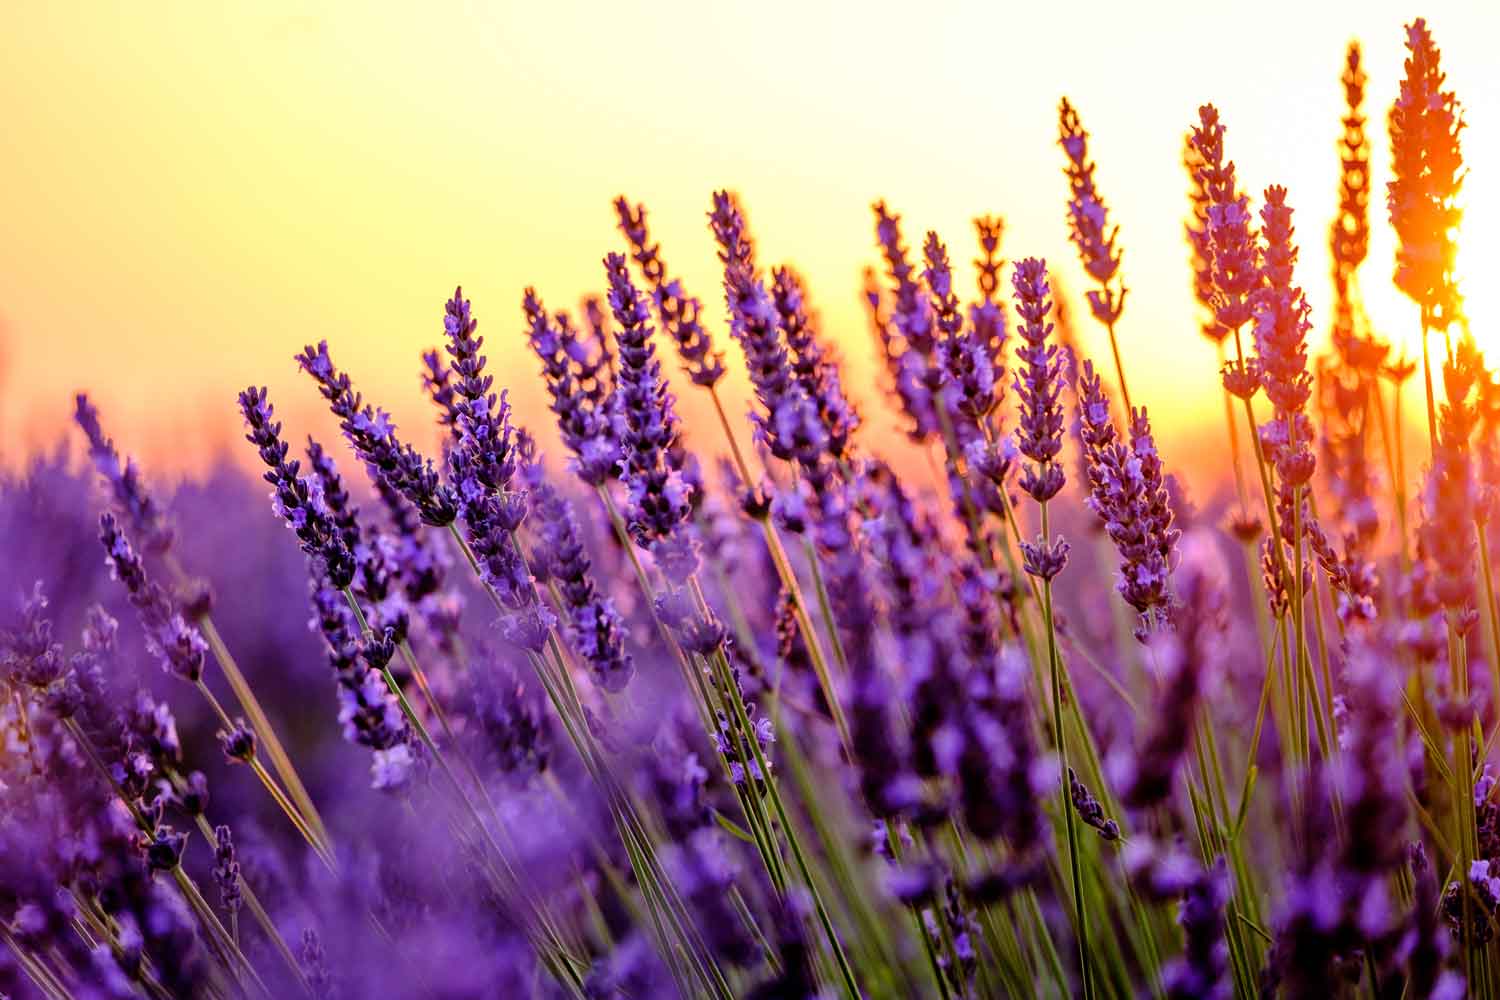 Lavender | Benefits, Uses, & Side Effects